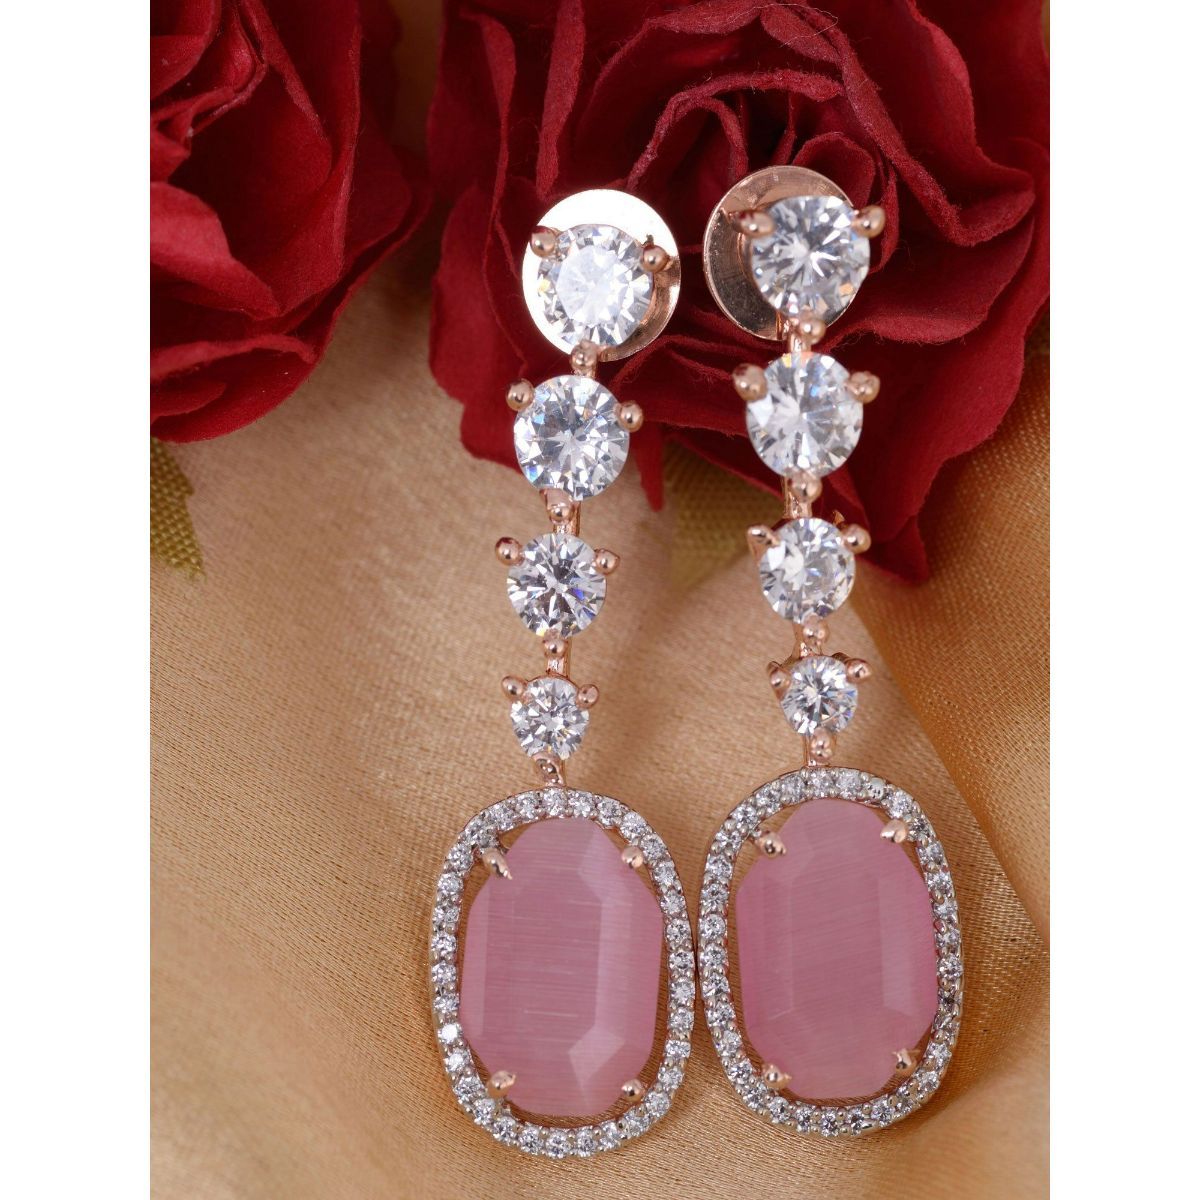 Buy Pink Earrings for Women by Saraf Rs Jewellery Online | Ajio.com